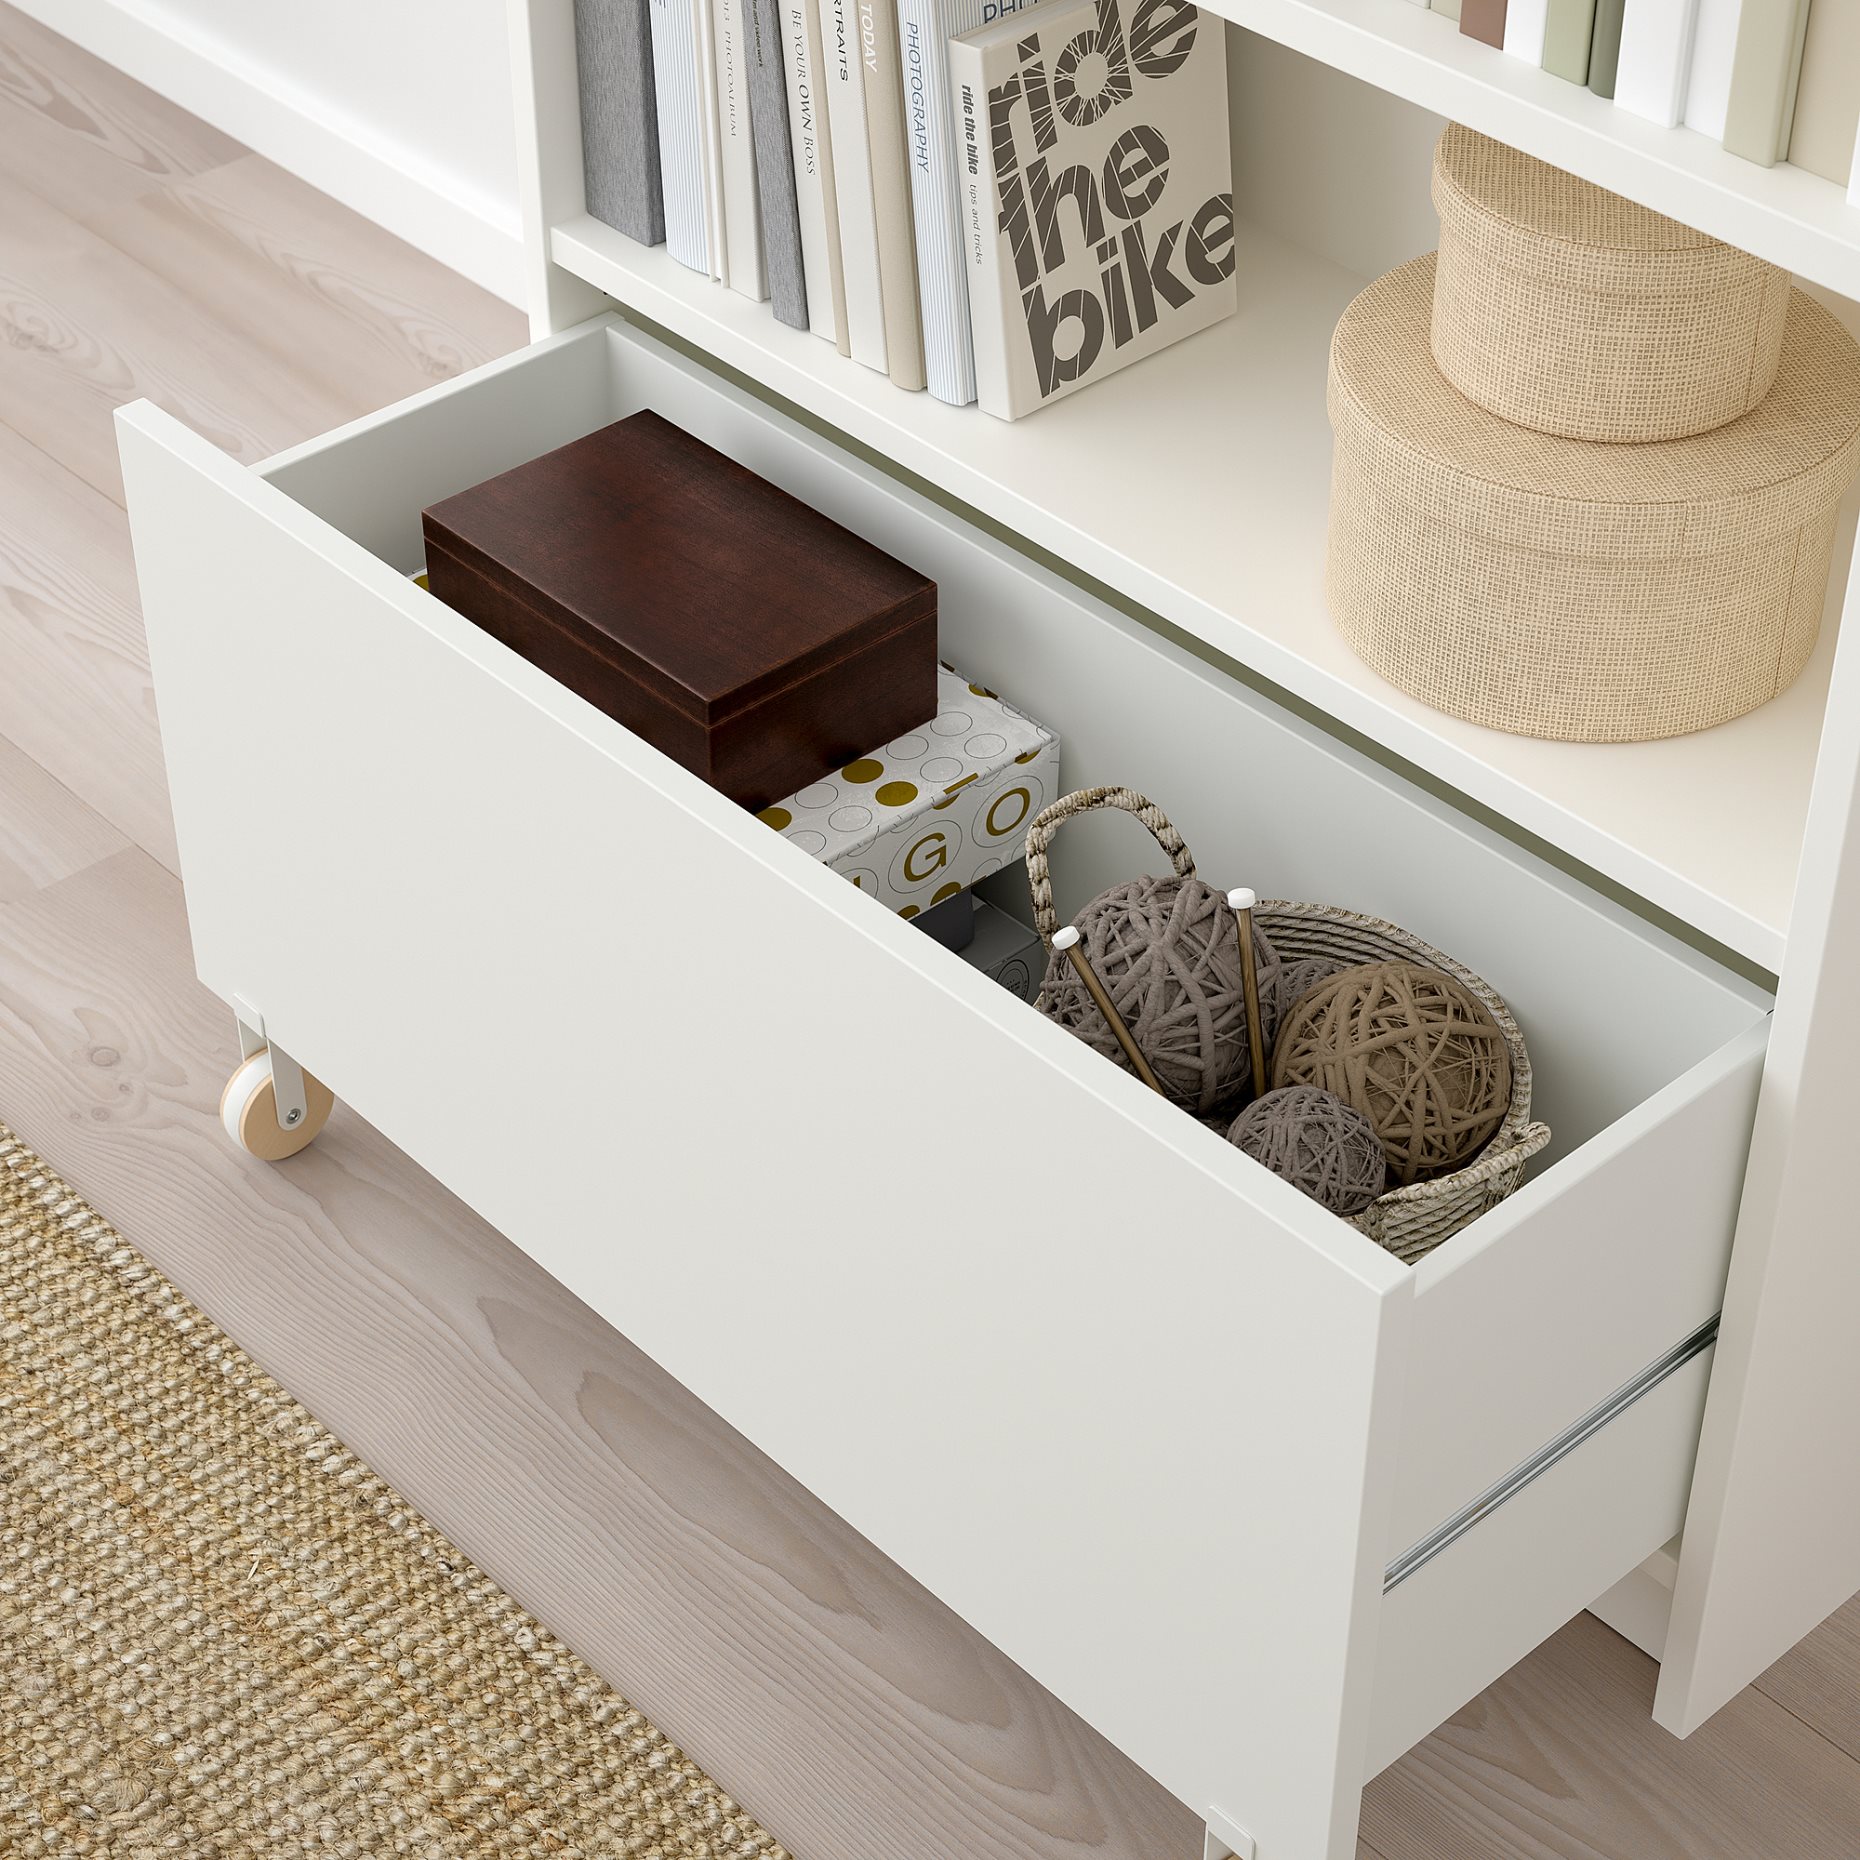 BILLY, bookcase with drawer, 80x30x202 cm, 394.838.08